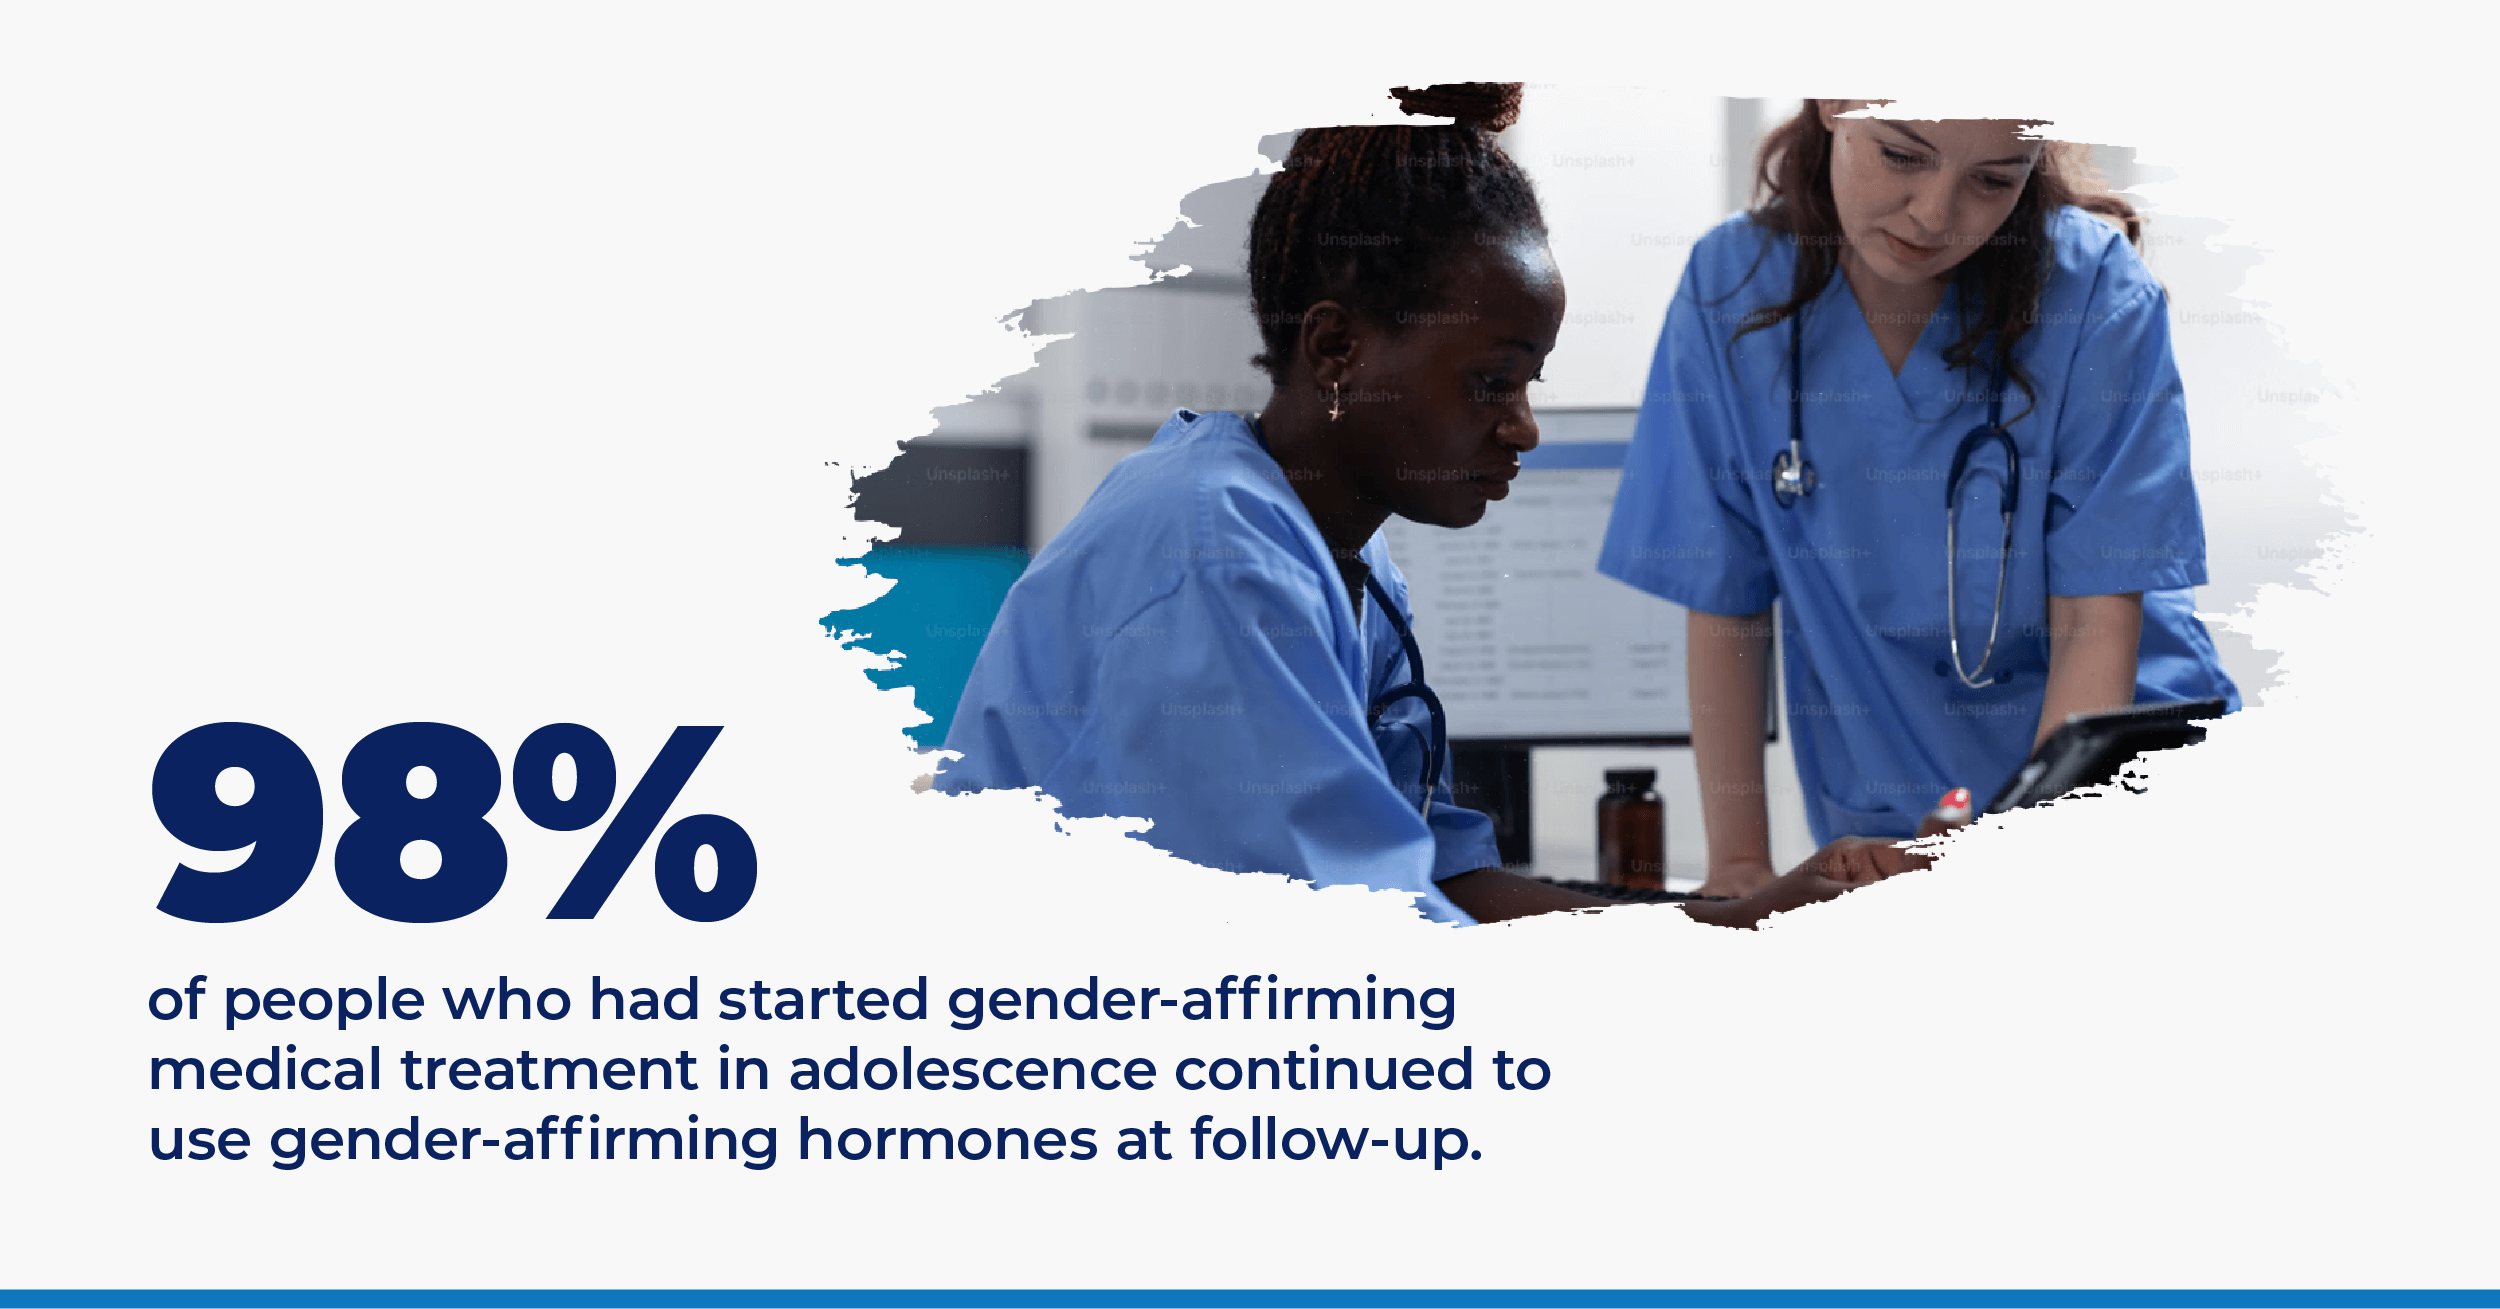 98% of people who had started gender-affirming medical treatment in adolescence continued to use gender-affirming hormones at follow-up. Source: https://pubmed.ncbi.nlm.nih.gov/36273487/